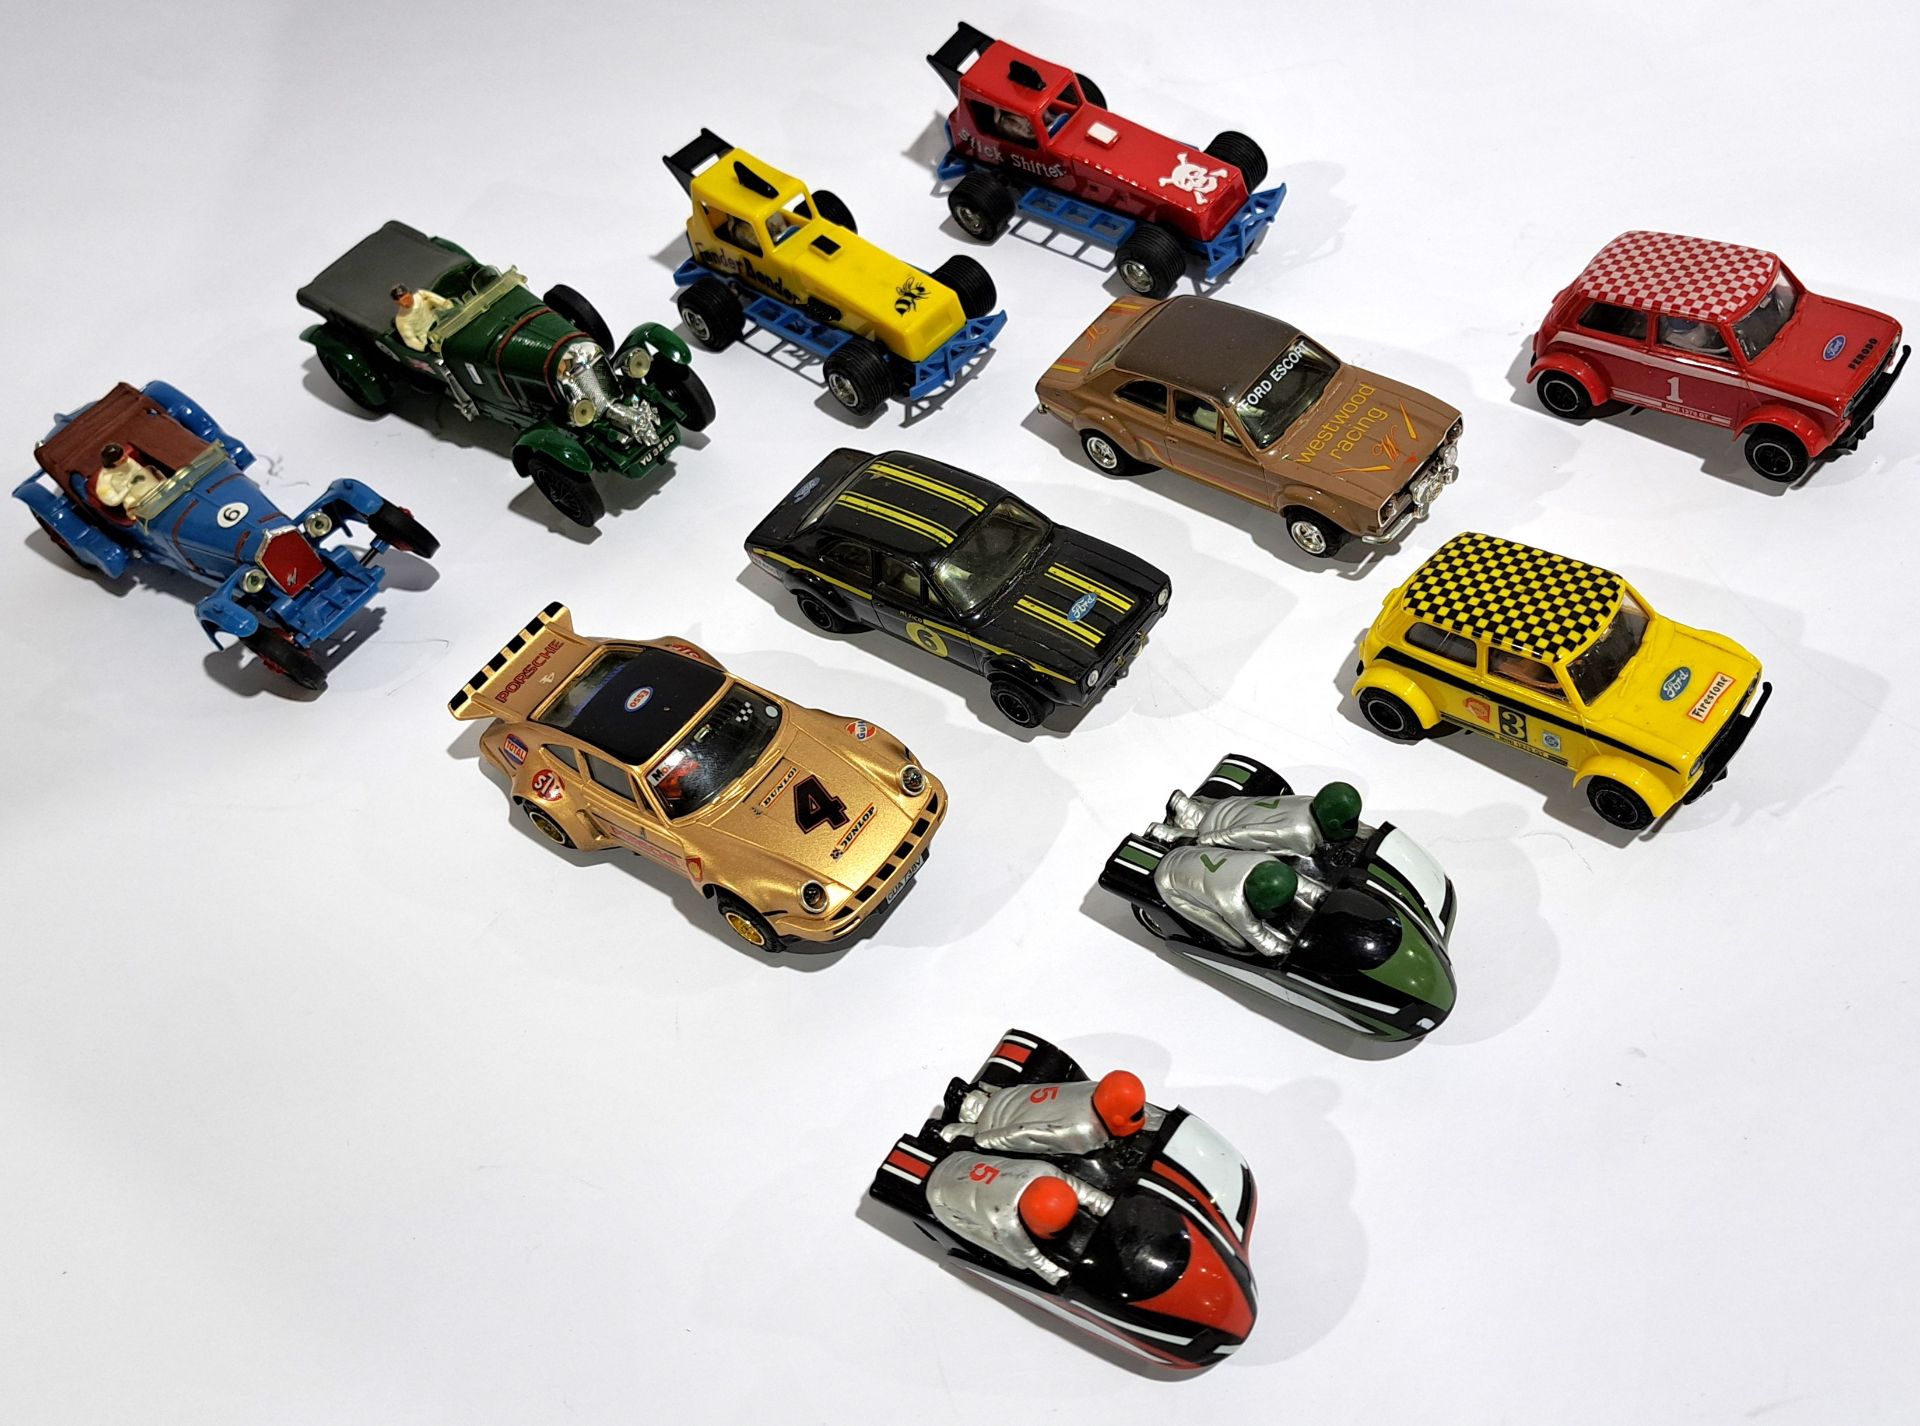 Scalextric Electric Model Racing Cars, an unboxed group